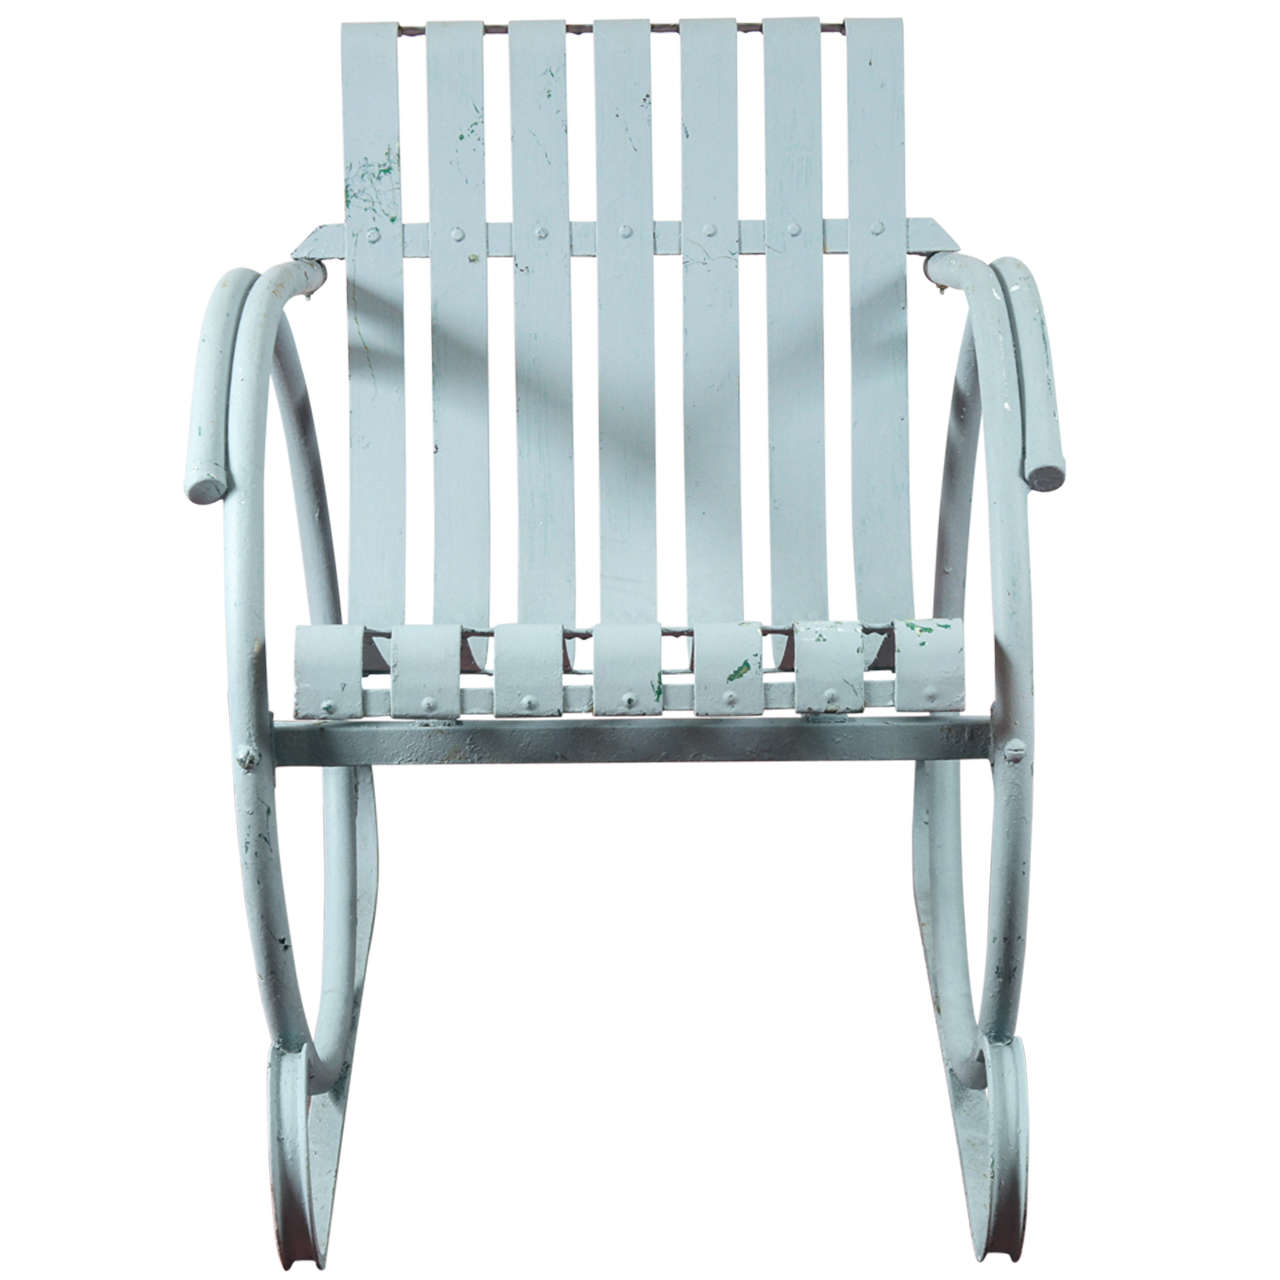 This garden chair has slatted seat placed between circular arms attached to sled-like runners -- lots of style and solid construction.  Painted iron throughout.  4 chairs available.  $750 per chair.

Arm height: 24.50 inches